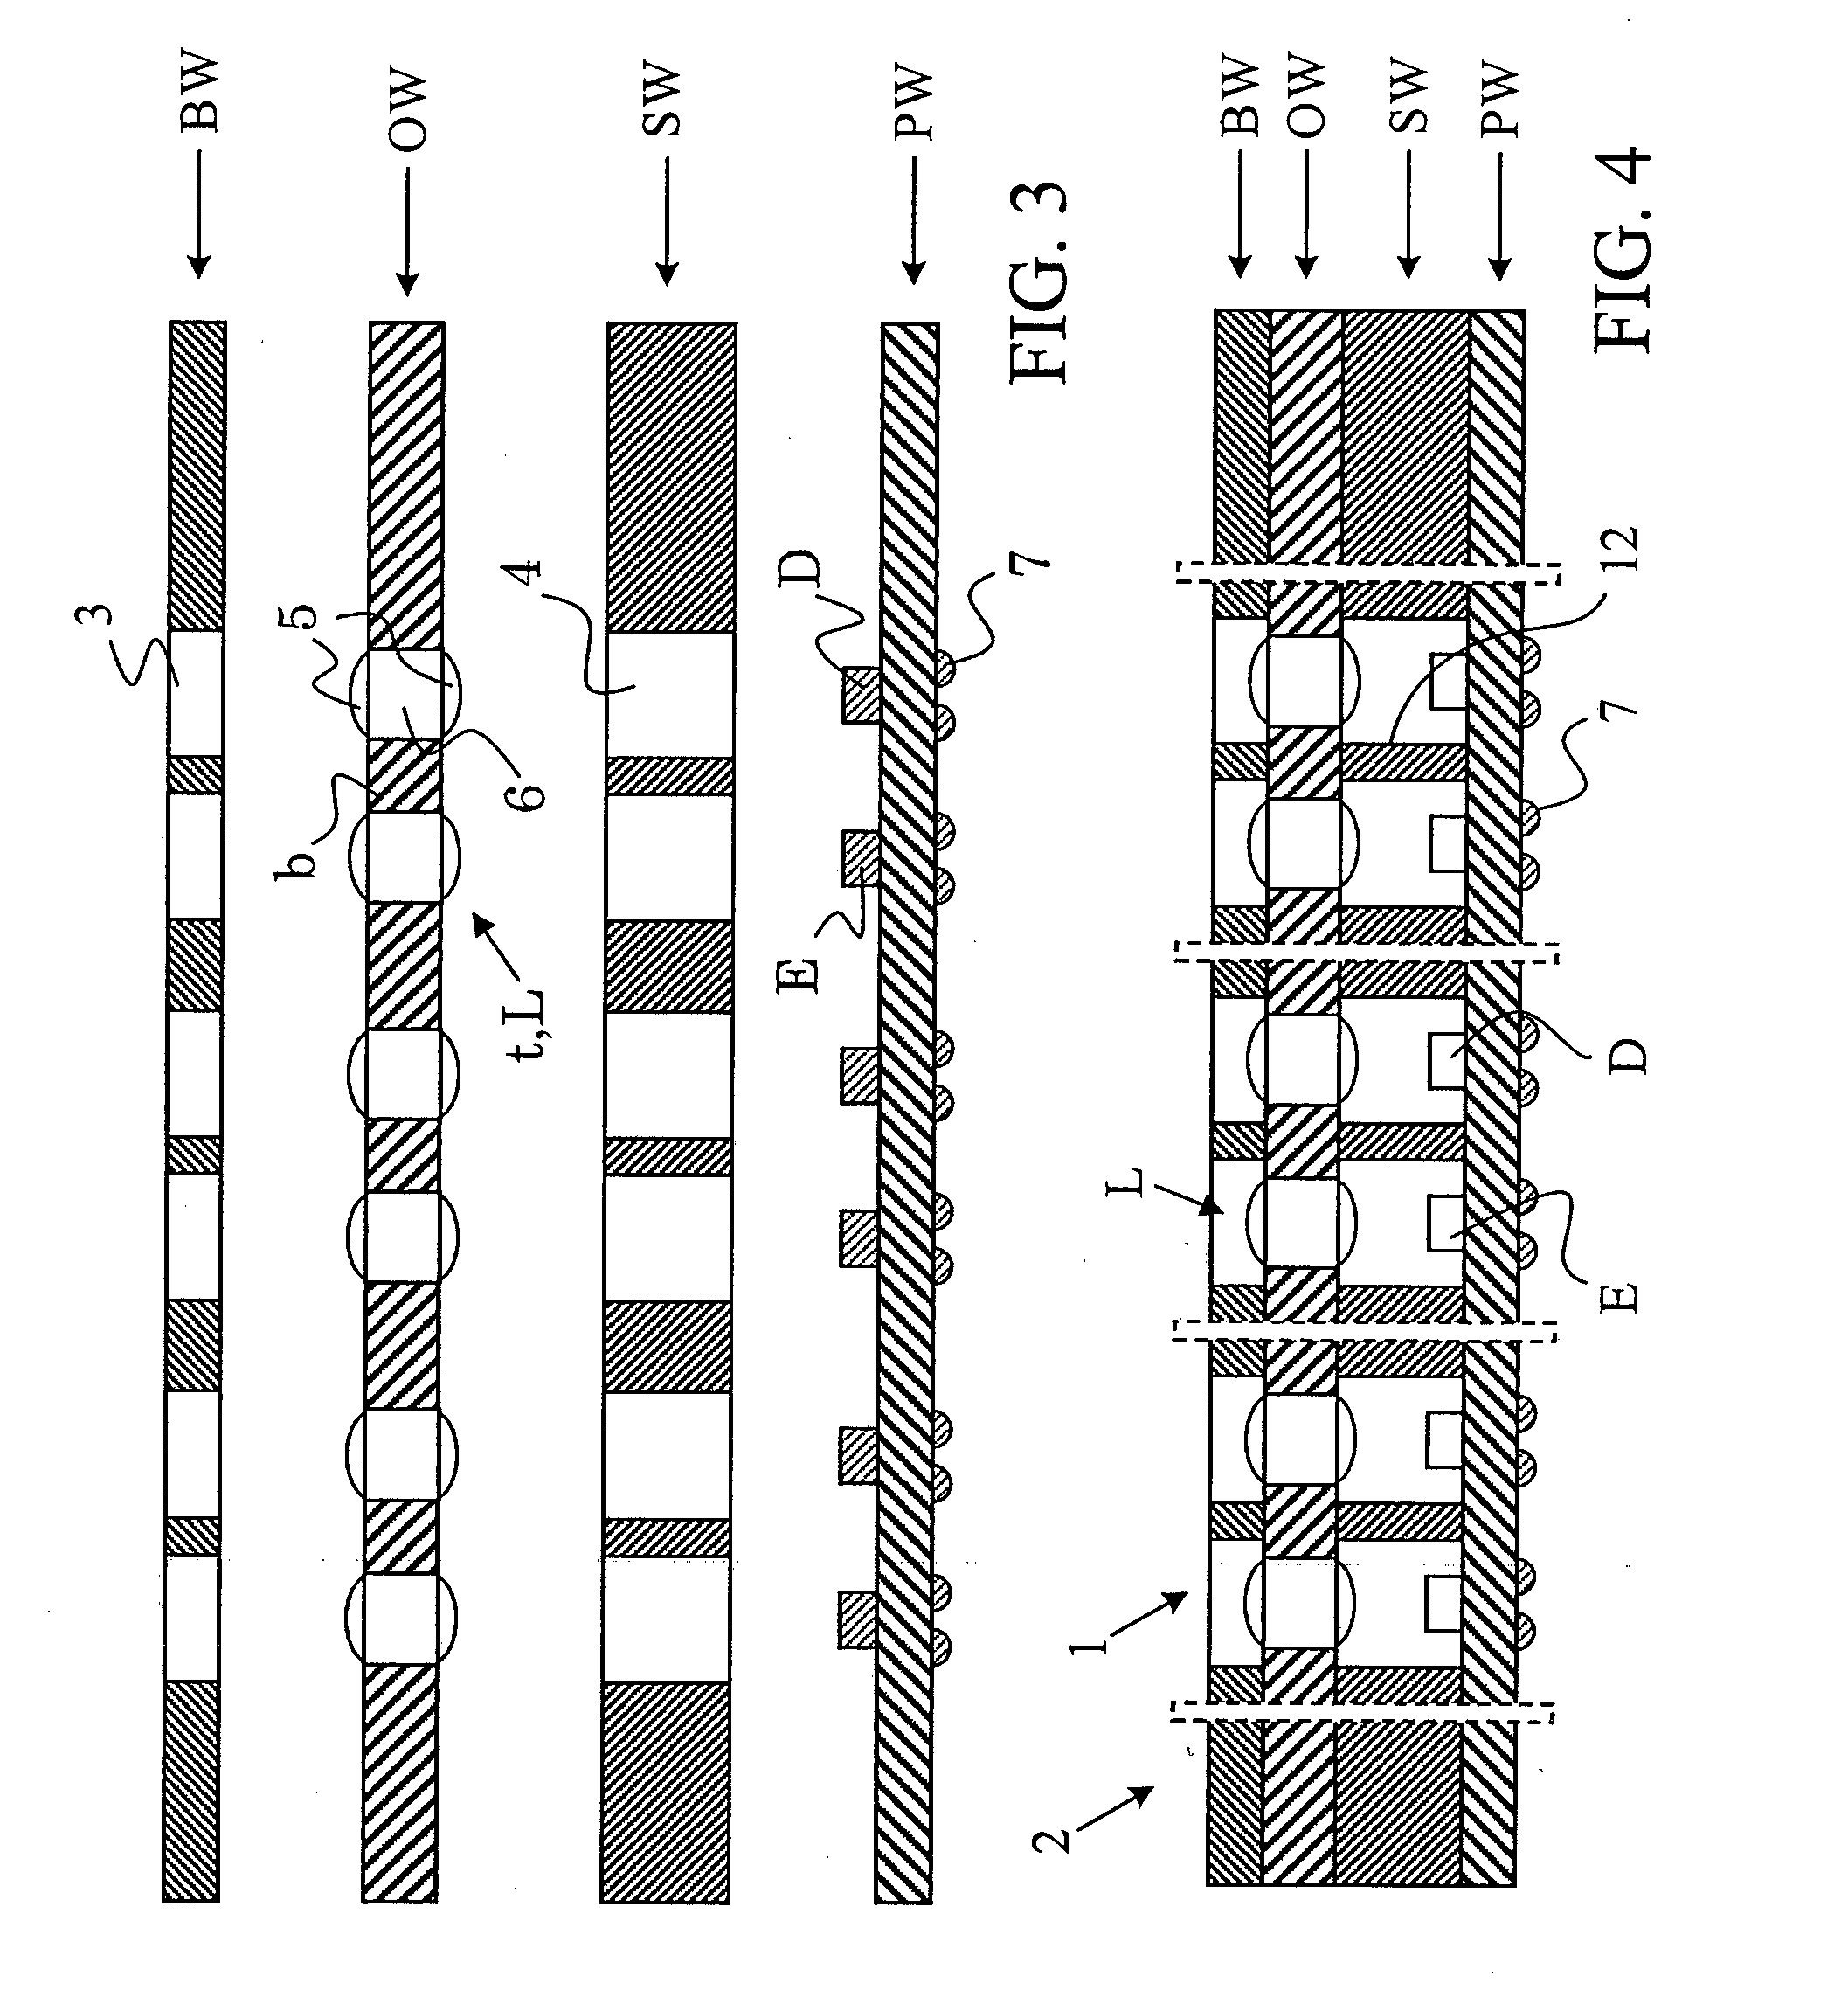 Opto-electronic module including a non-transparent separation member between a light emitting element and a light detecting element